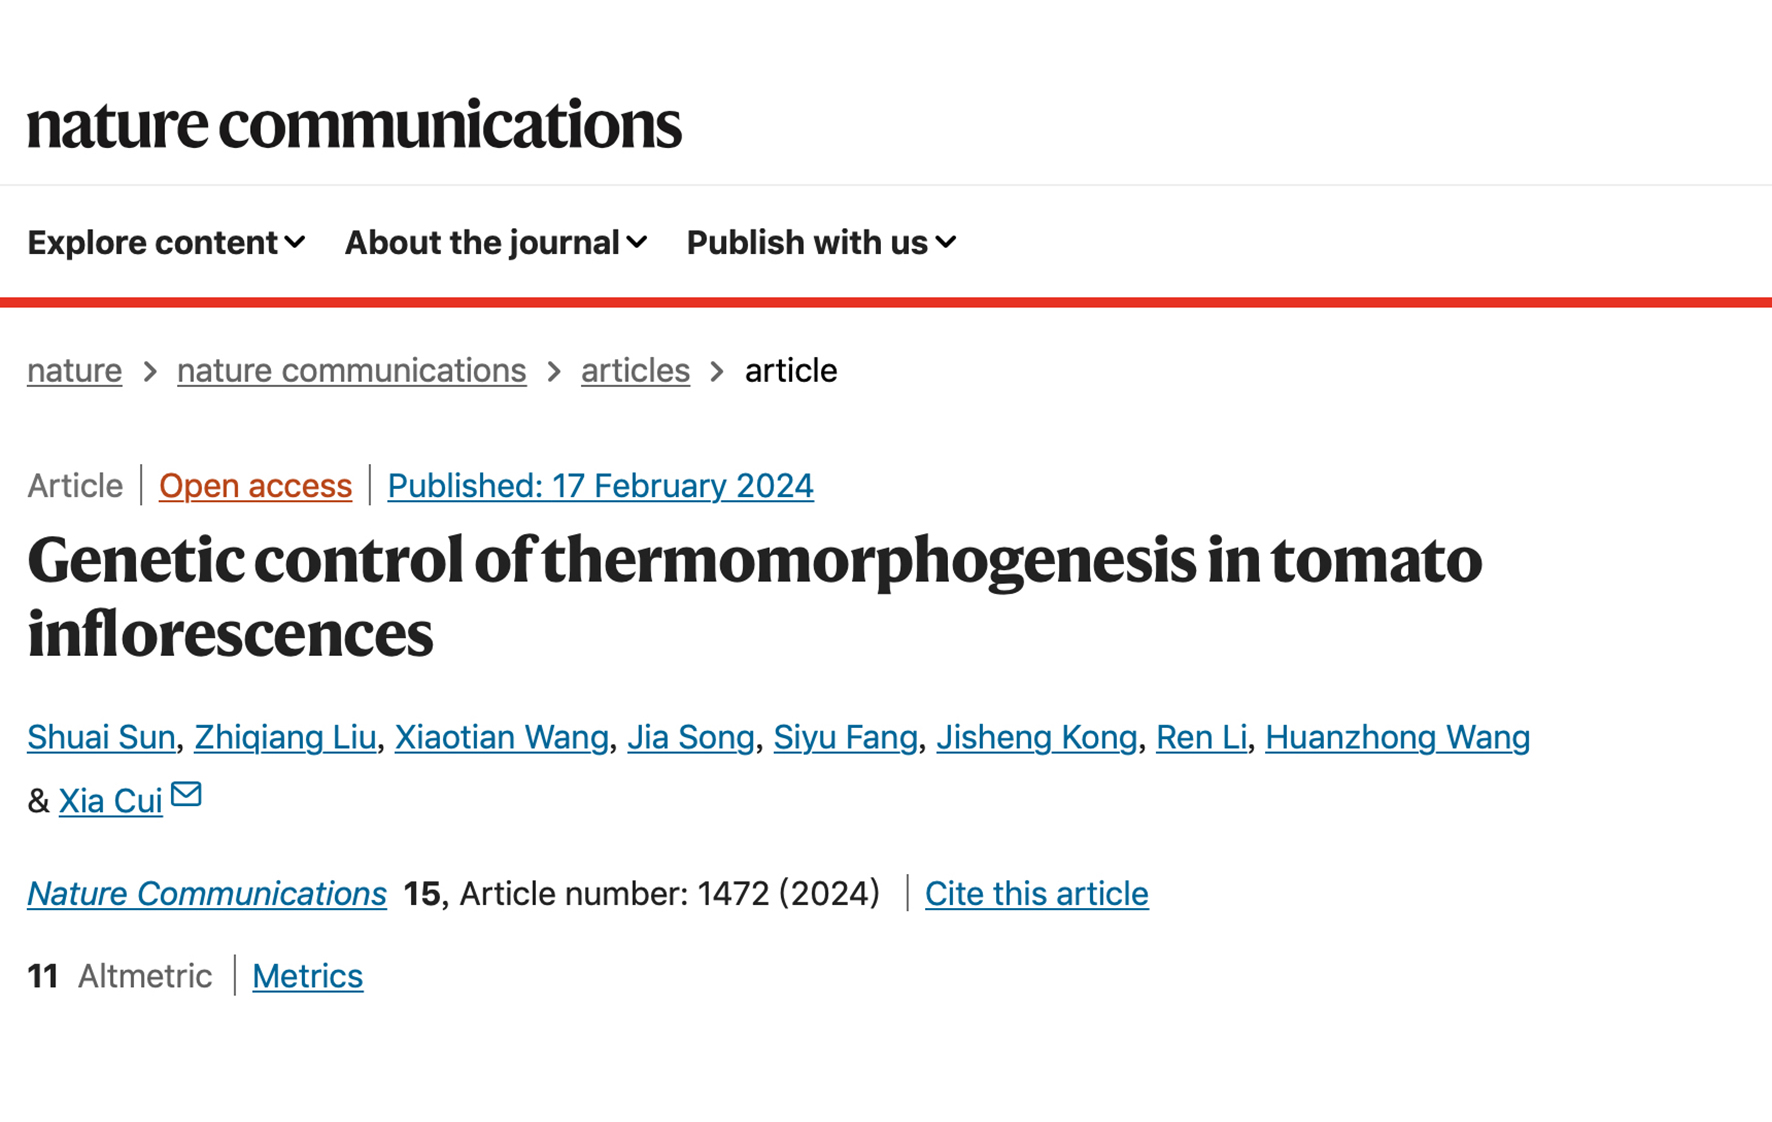 The Quality Molecular Improvement Research Group of Institute of Vegetables and Flowers reveals a new mechanism for the thermal morphogenesis of tomato inflorescences